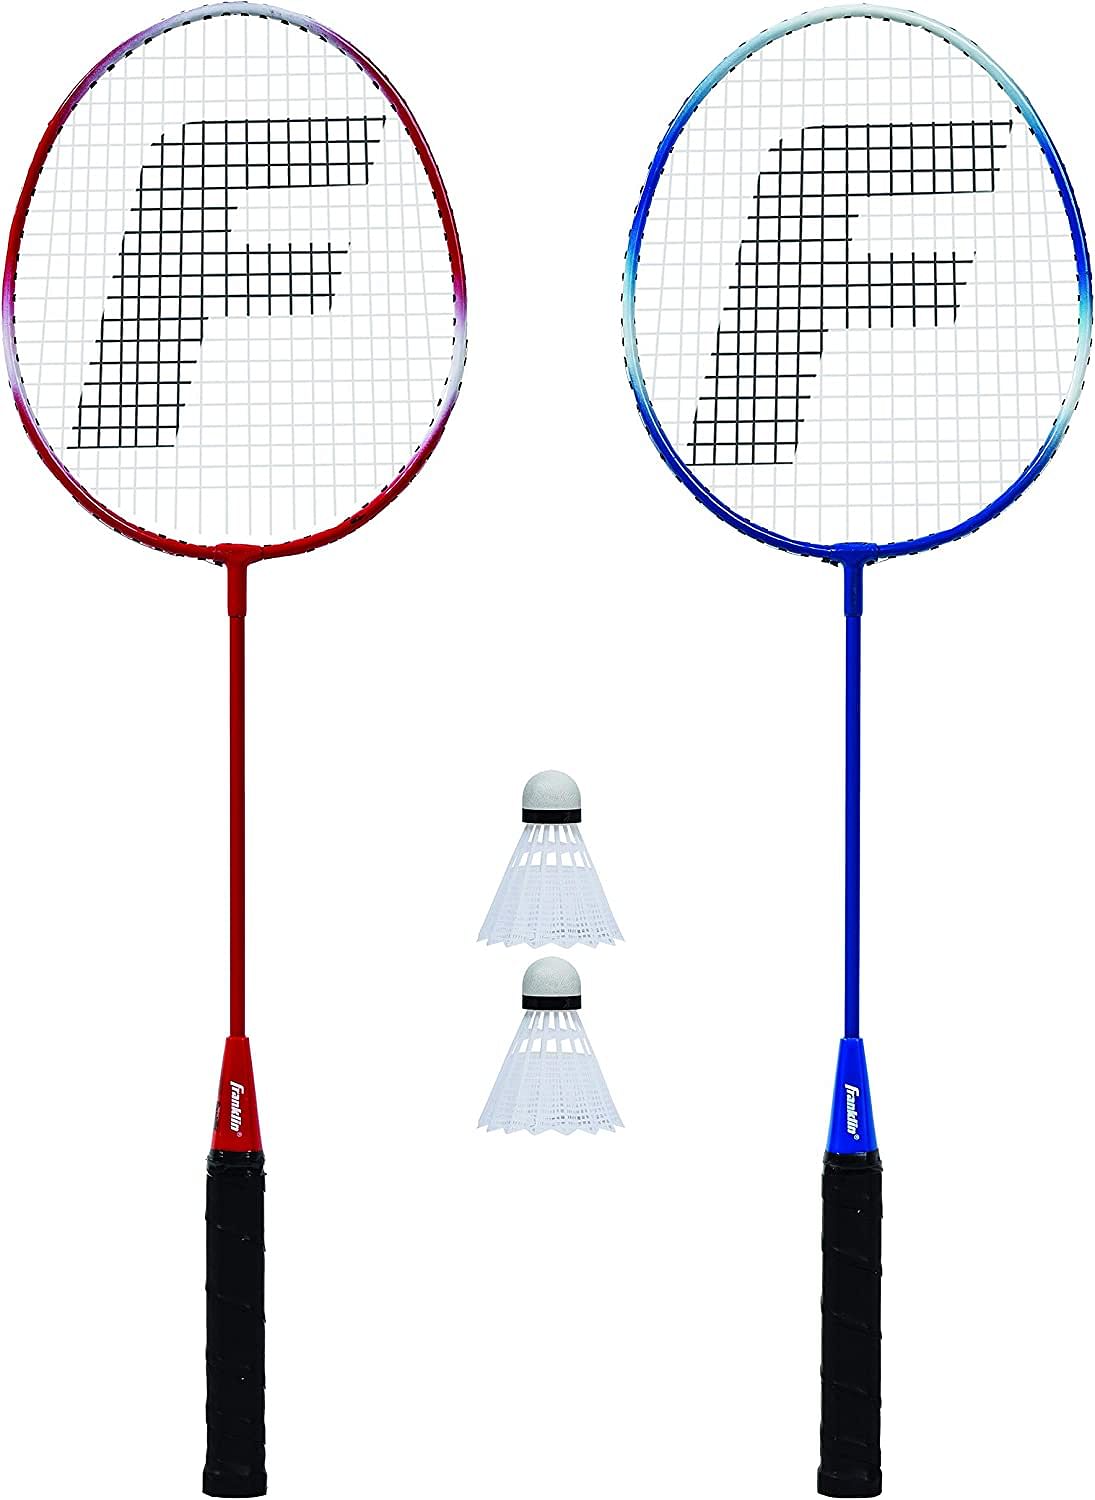 Franklin Sports 2 Player Badminton Replacement Set - 2 Badminton Racquets and 2 Shuttlecocks - Adults and Kids Backyard Game Red, White, Blue